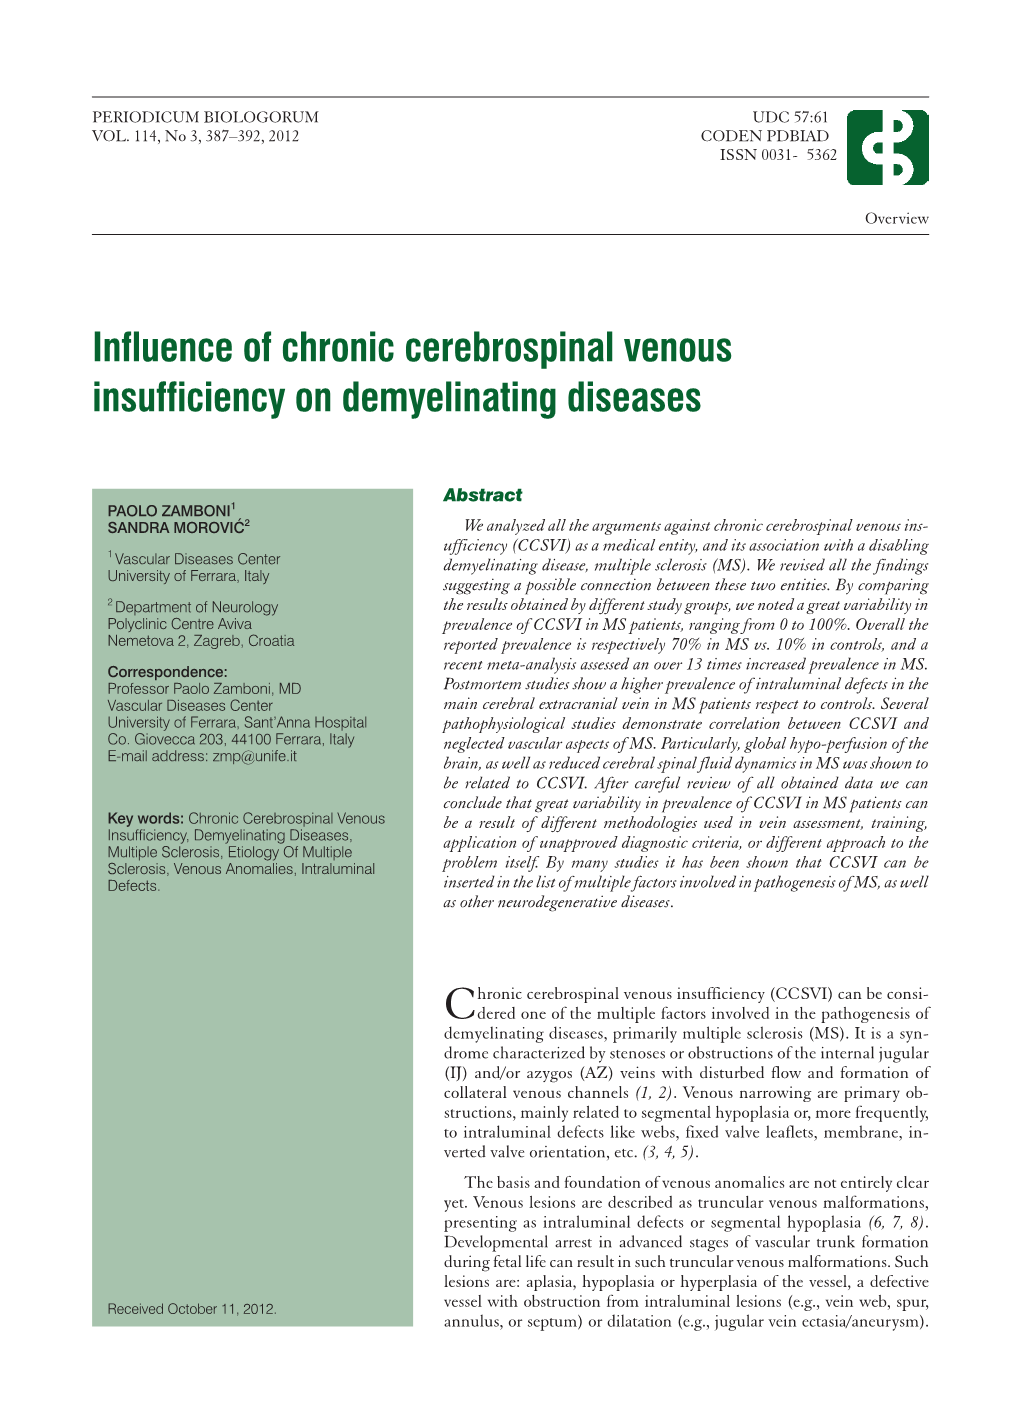 Influence of Chronic Cerebrospinal Venous Insufficiency on Demyelinating Diseases